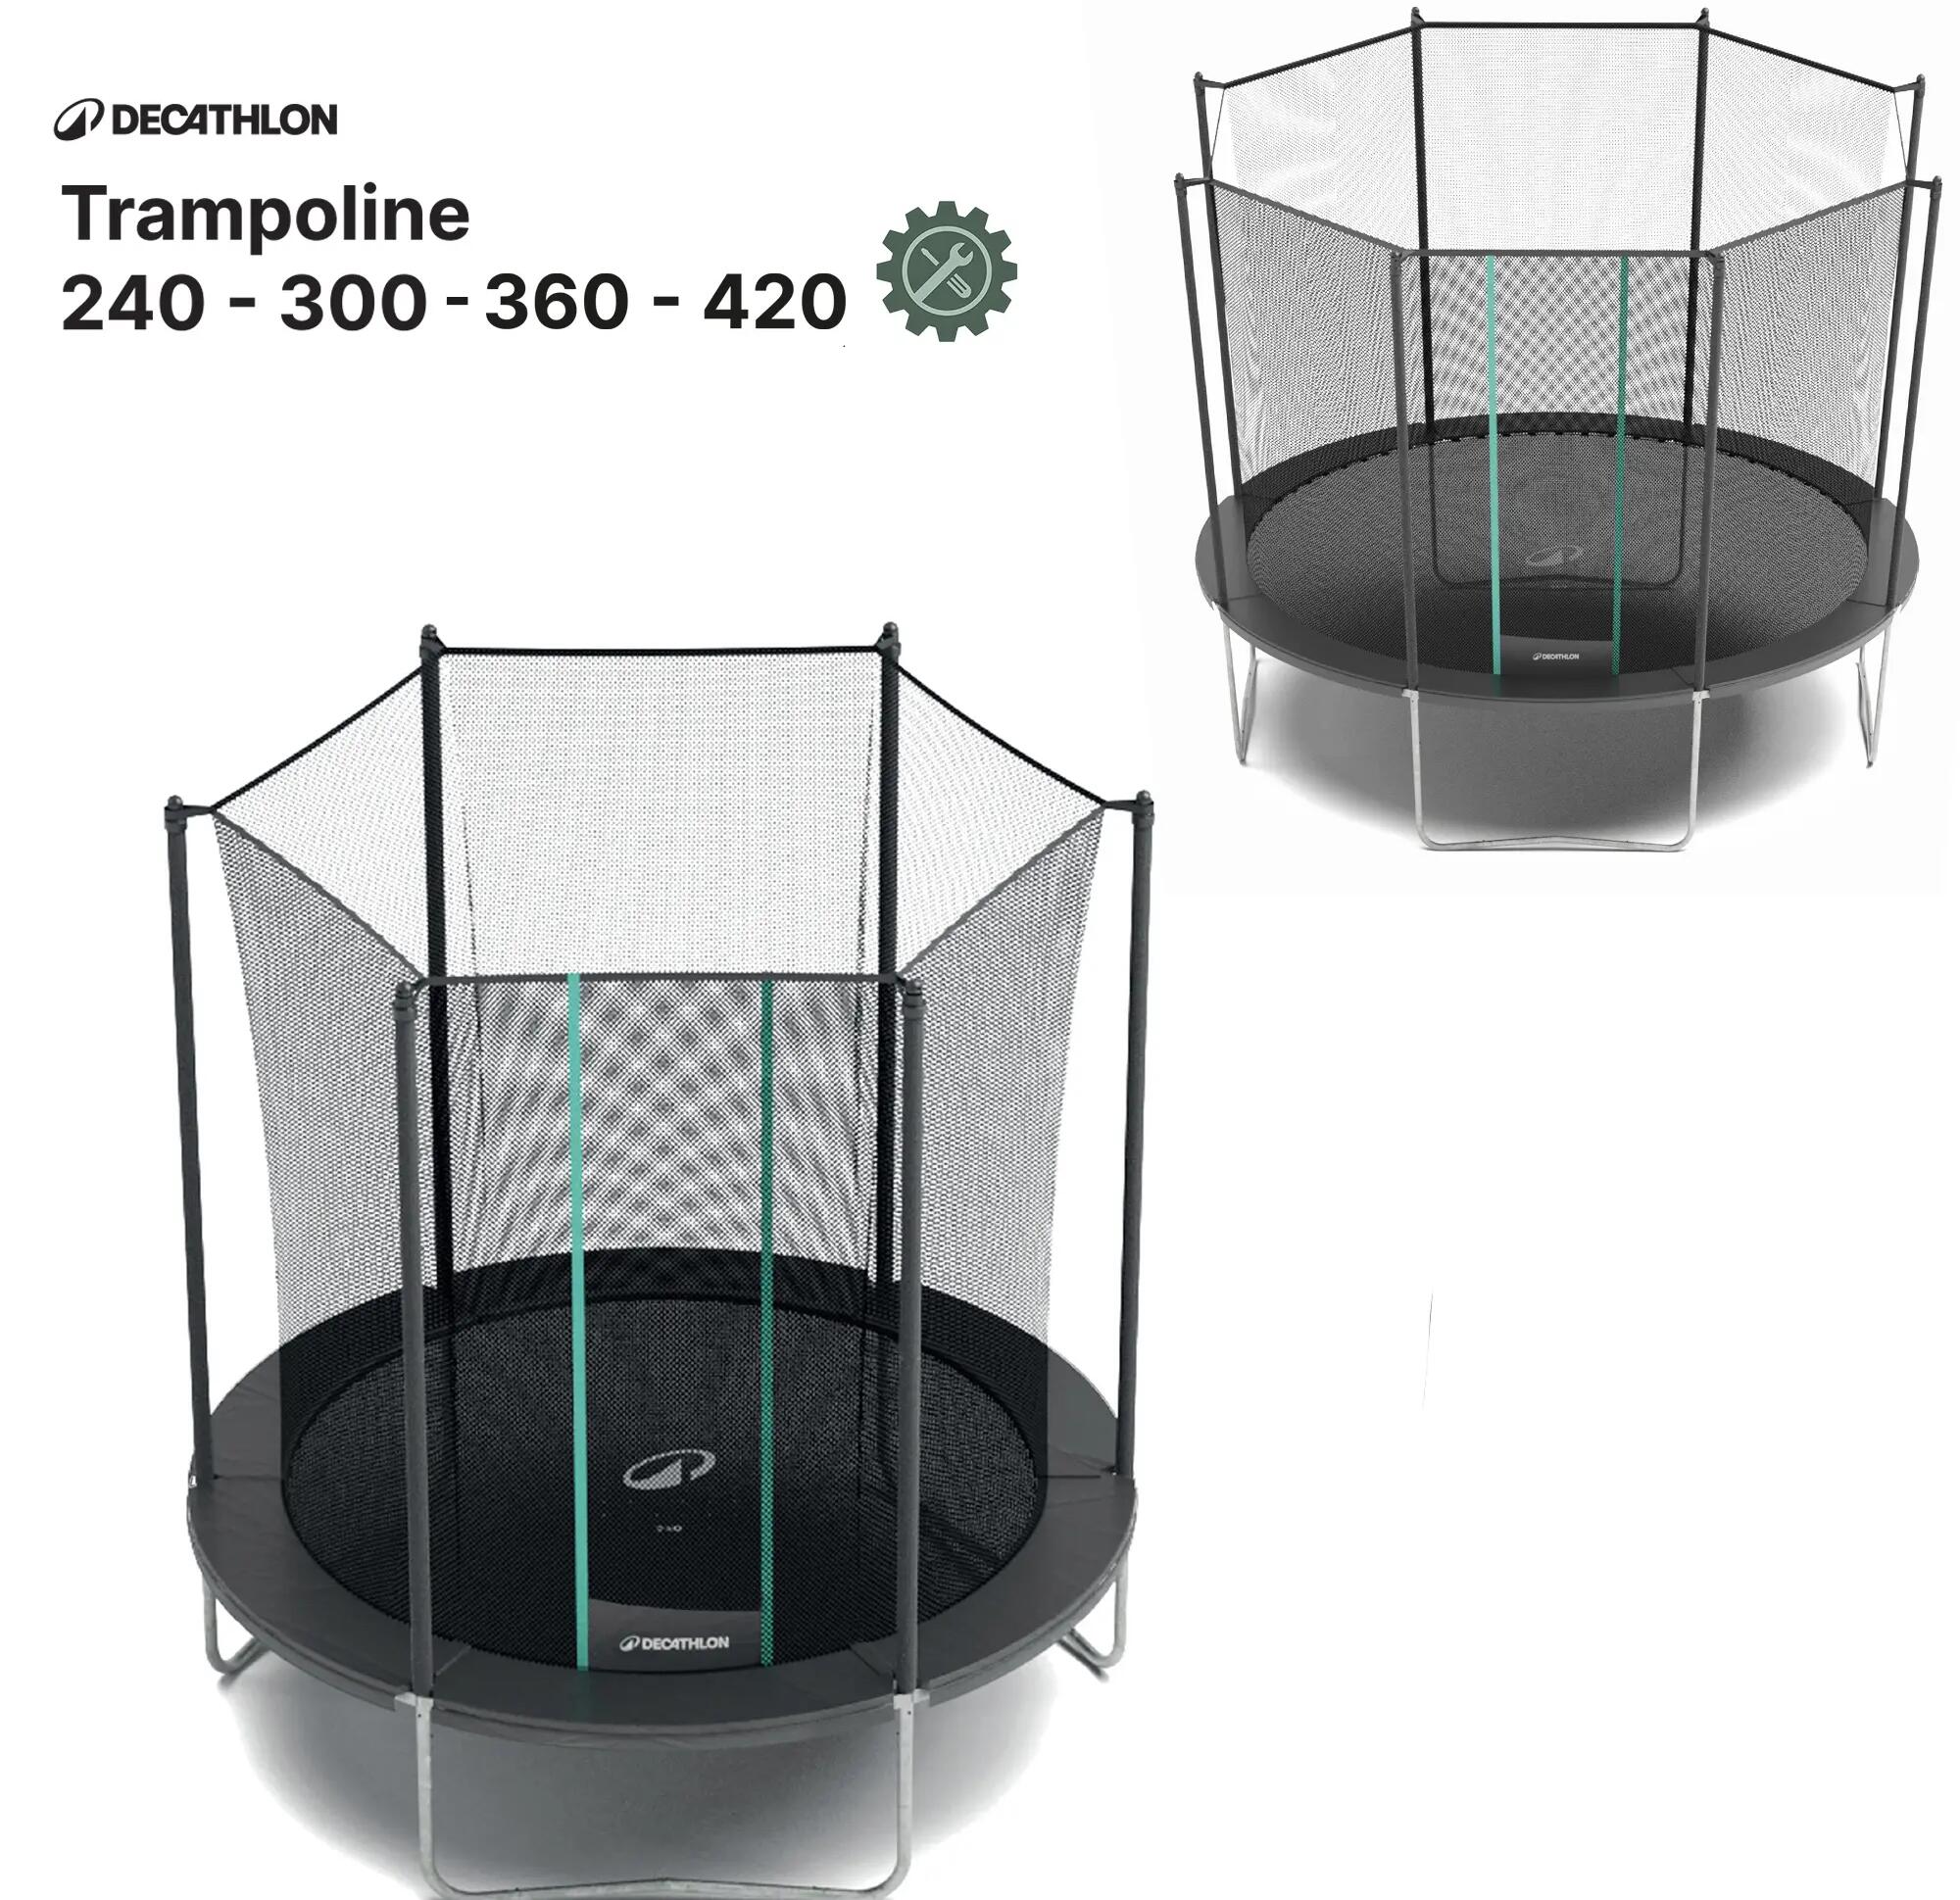 Round Trampoline 300: User guide and repairs